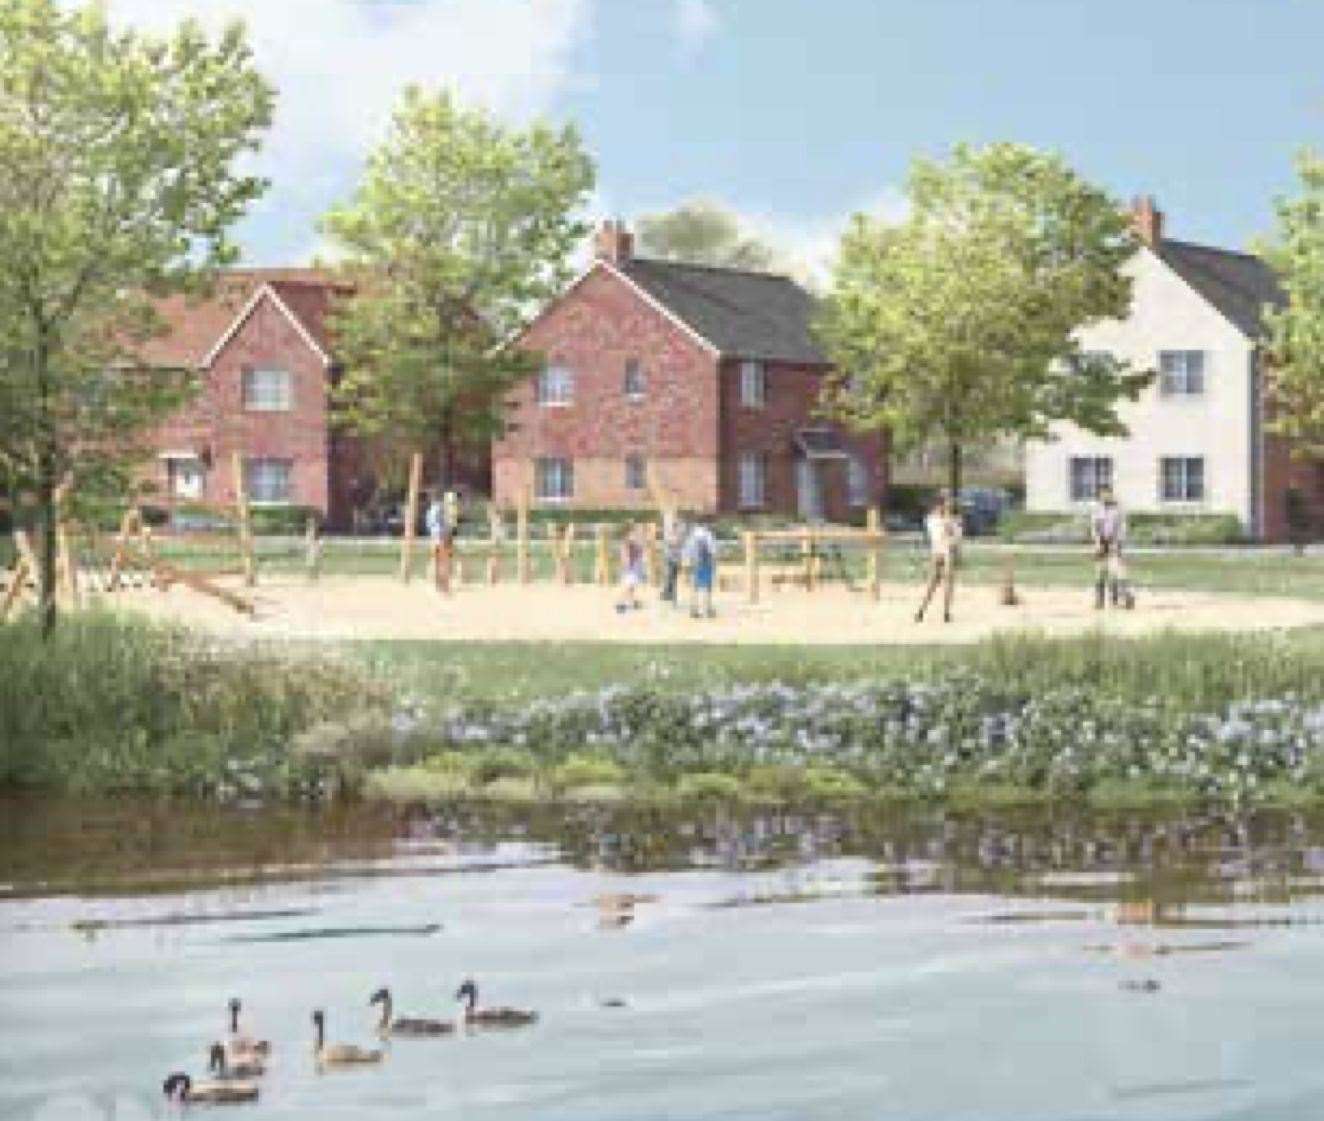 The Wingham estate to be built by developer Dandara would also feature two play areas, a pond, green space and community orchards. Photo: Dandara